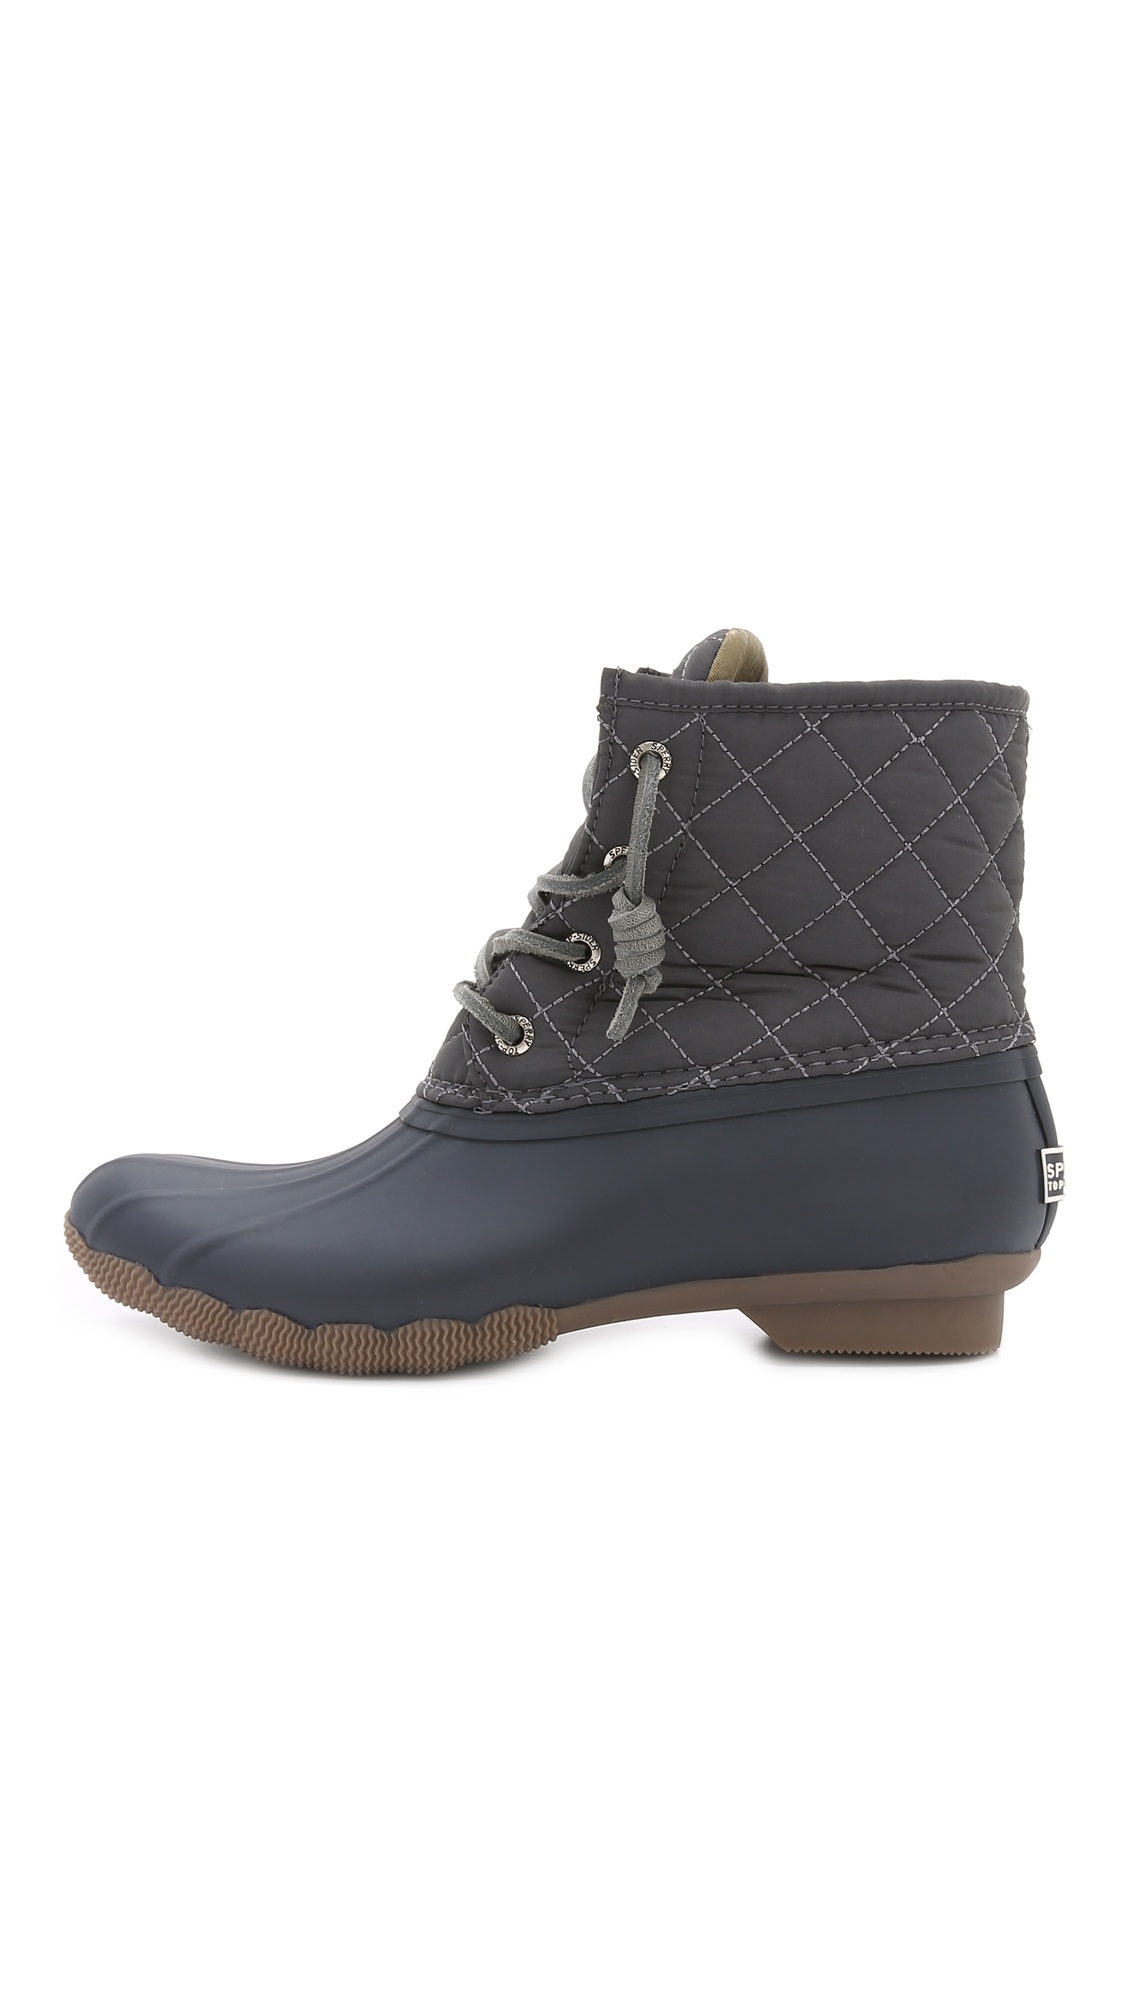 Lyst - Sperry Top-Sider Saltwater Quilted Water-Resistant Boots in Blue